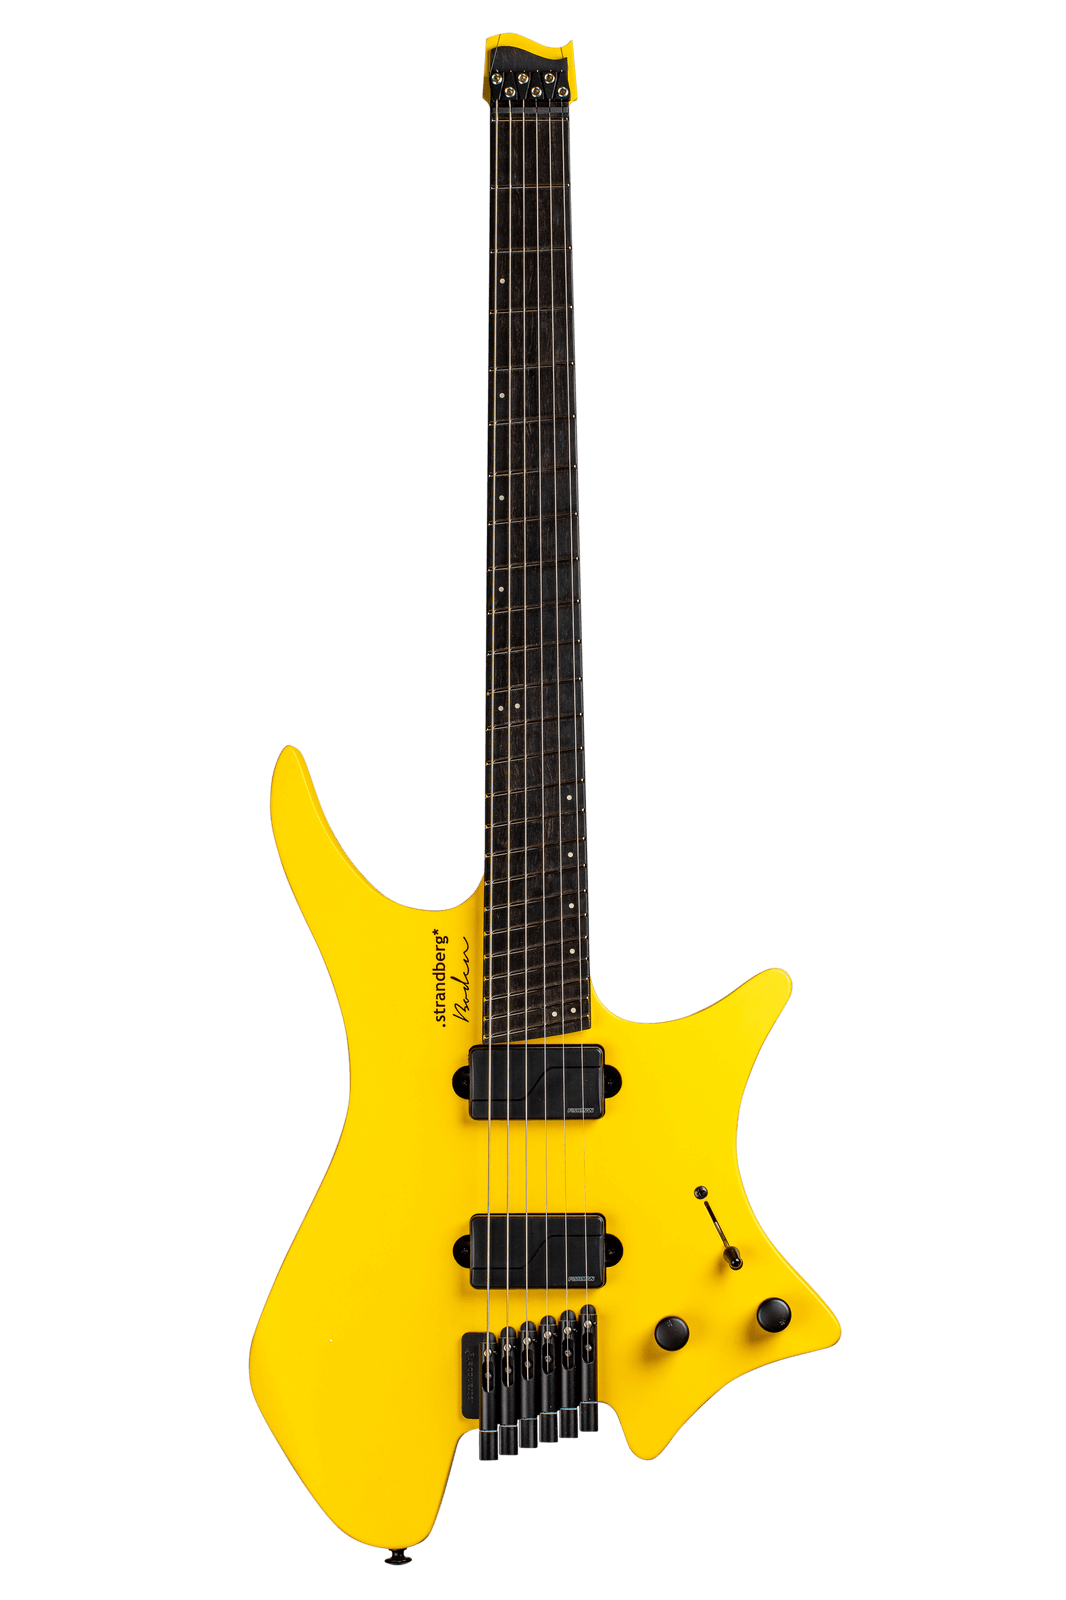 Headless Guitar Boden Metal 6 string yellow front view